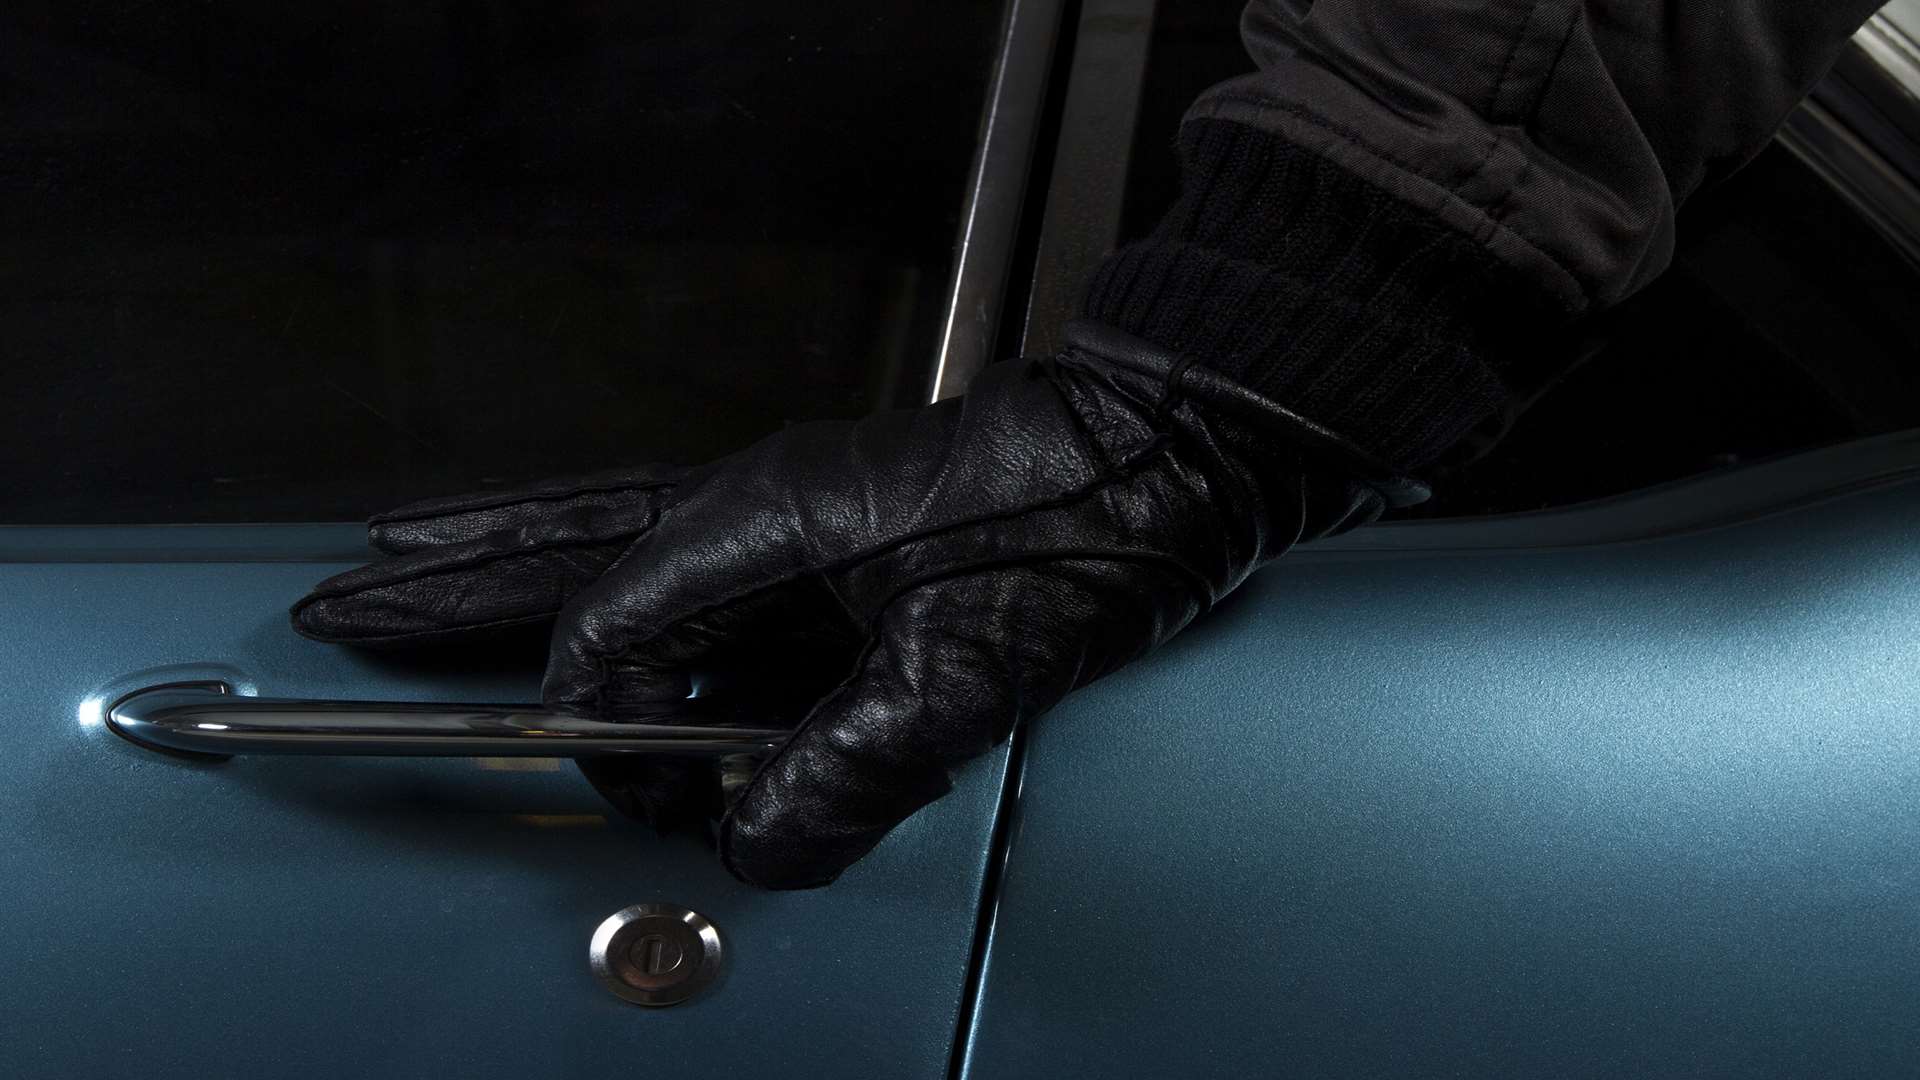 The man has been charged with the robbery of a vehicle. Picture: Thinkstock